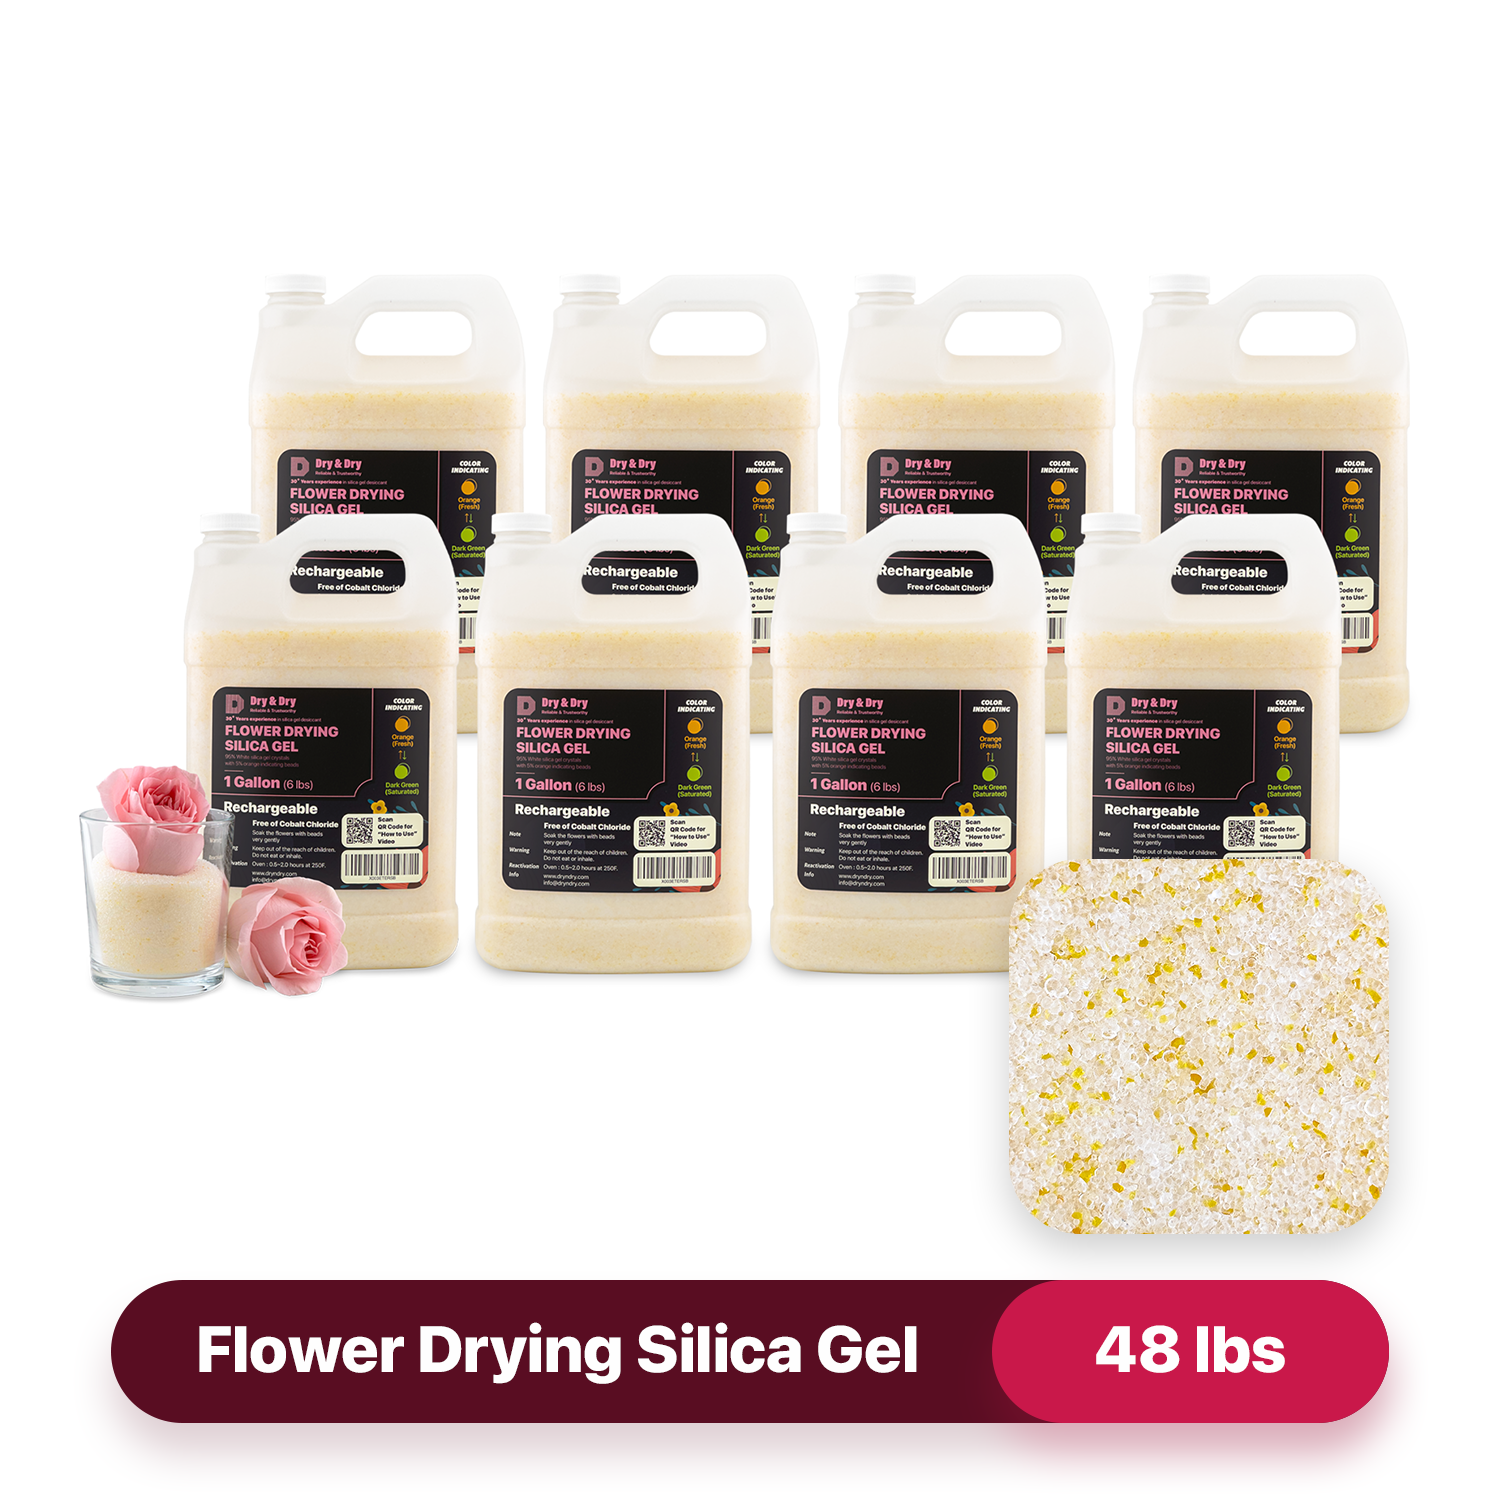 Dry & Dry Premium Silica Gel for Flower Drying Desiccant (Orange Indicating) - (Net 48 LBS)